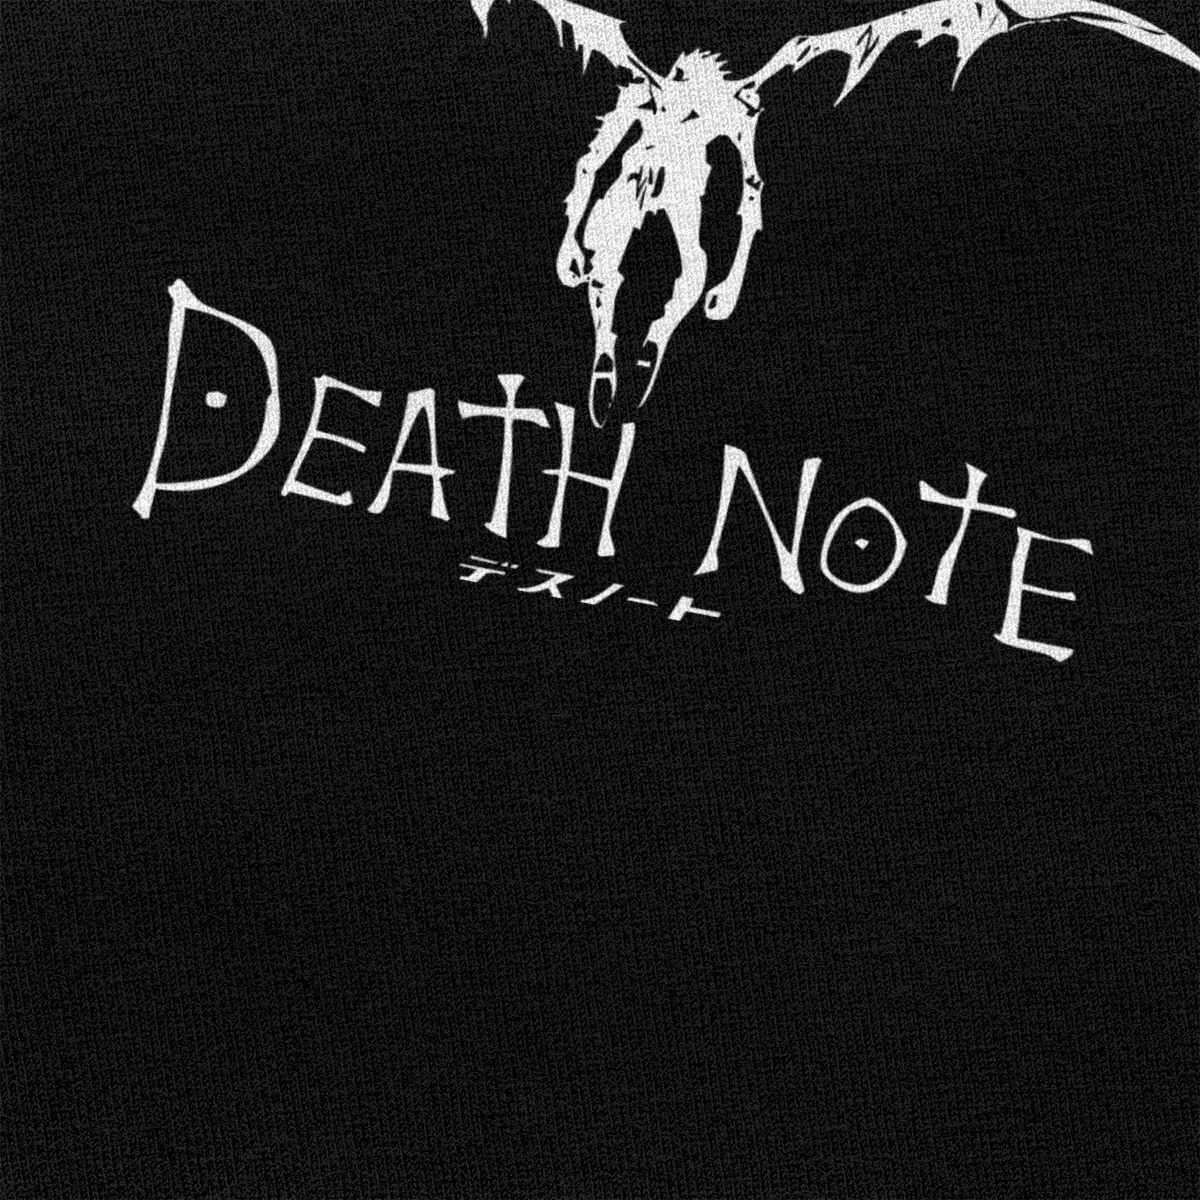 Death Note – Printed T-Shirt (+10 Colors) T-Shirts & Tank Tops